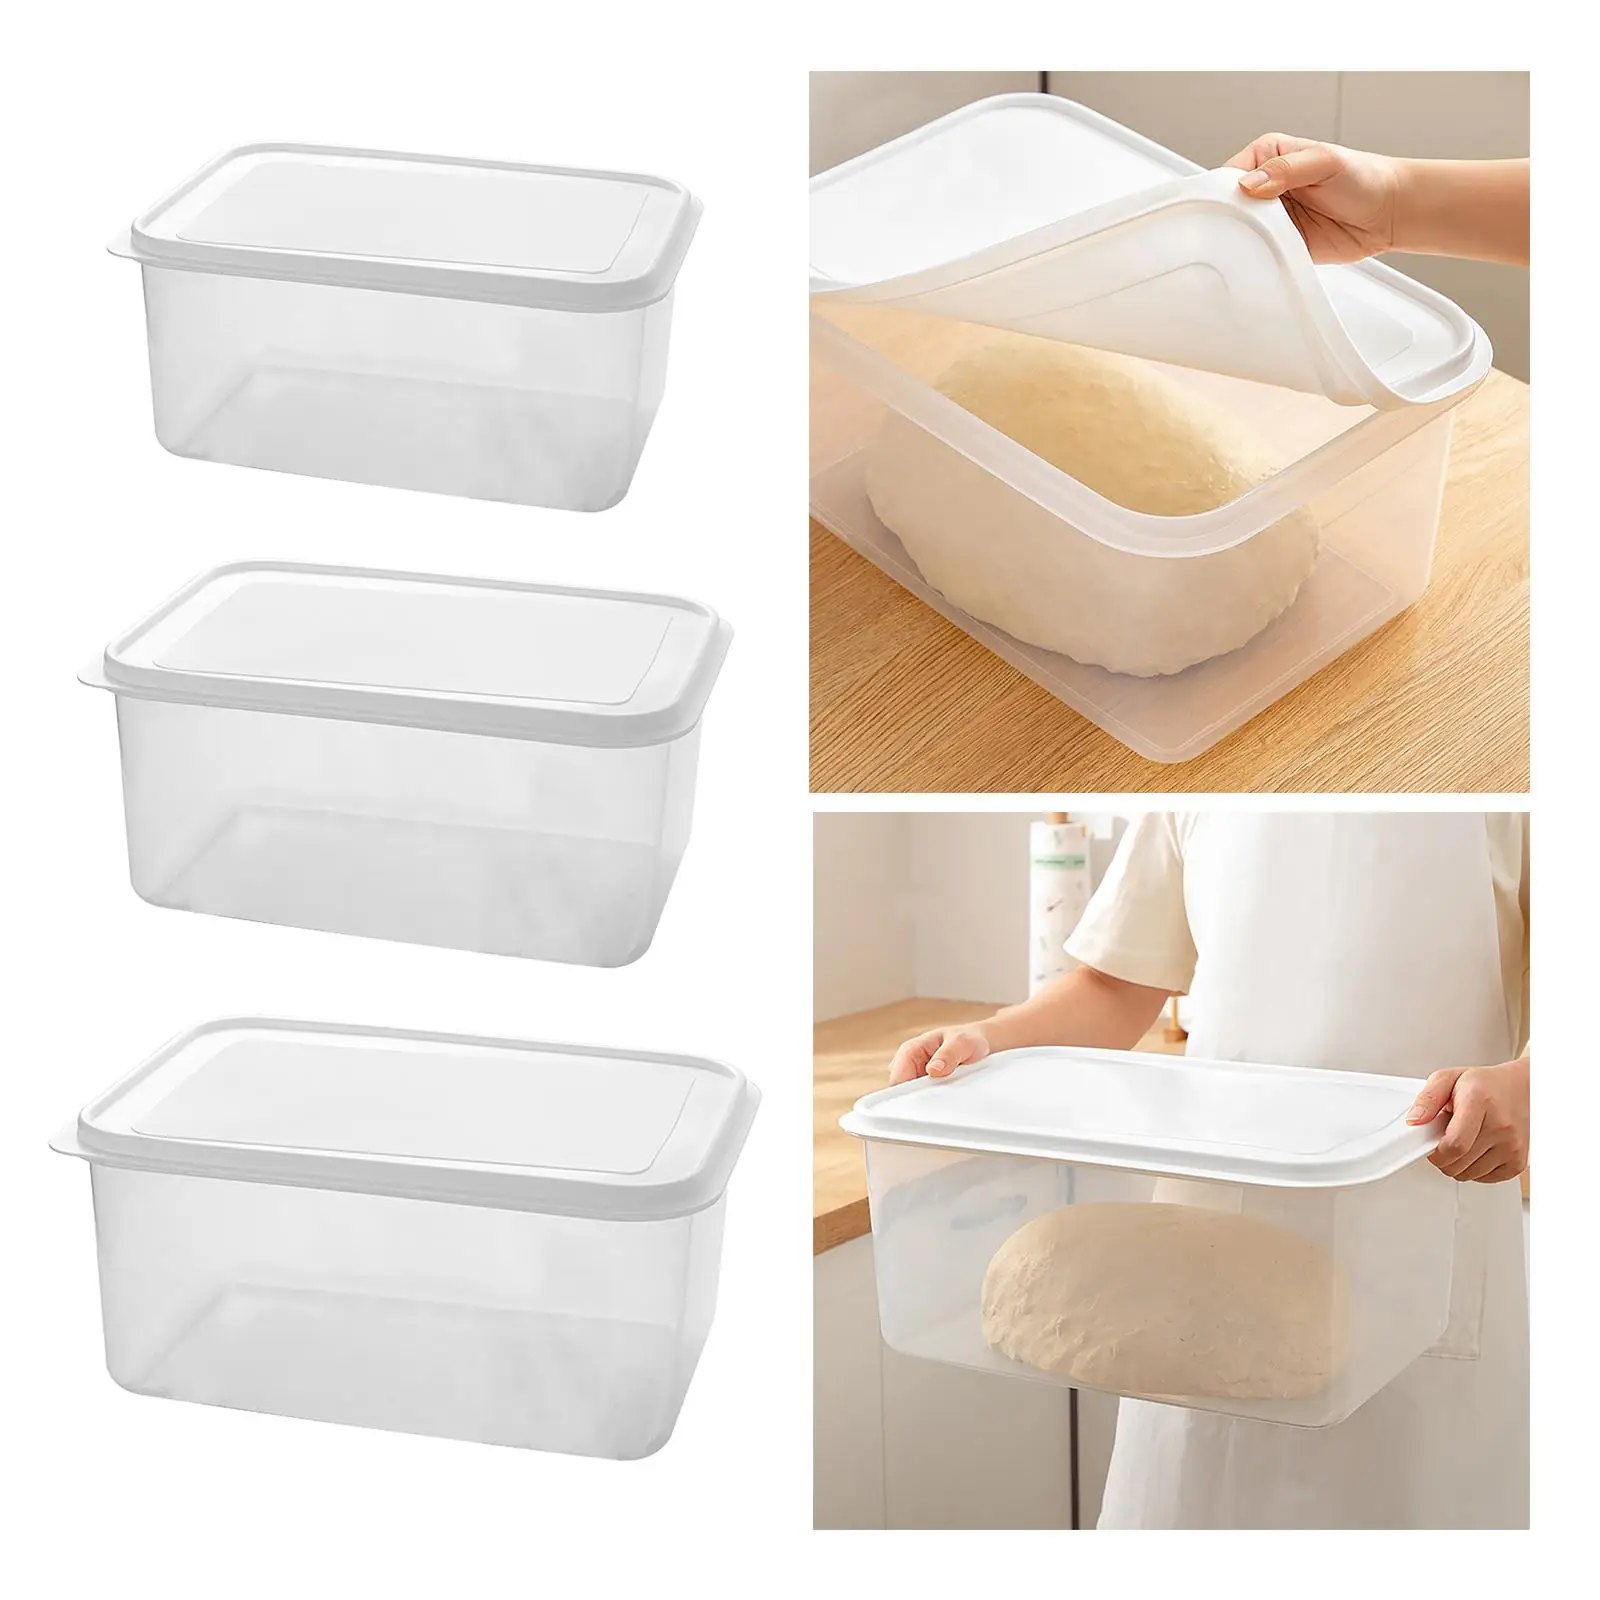 Pizza Dough Proofing Box Dough Fermentation Storage Box Pizza Dough Tray for Restaurant Refrigerator Home Pies French Bread